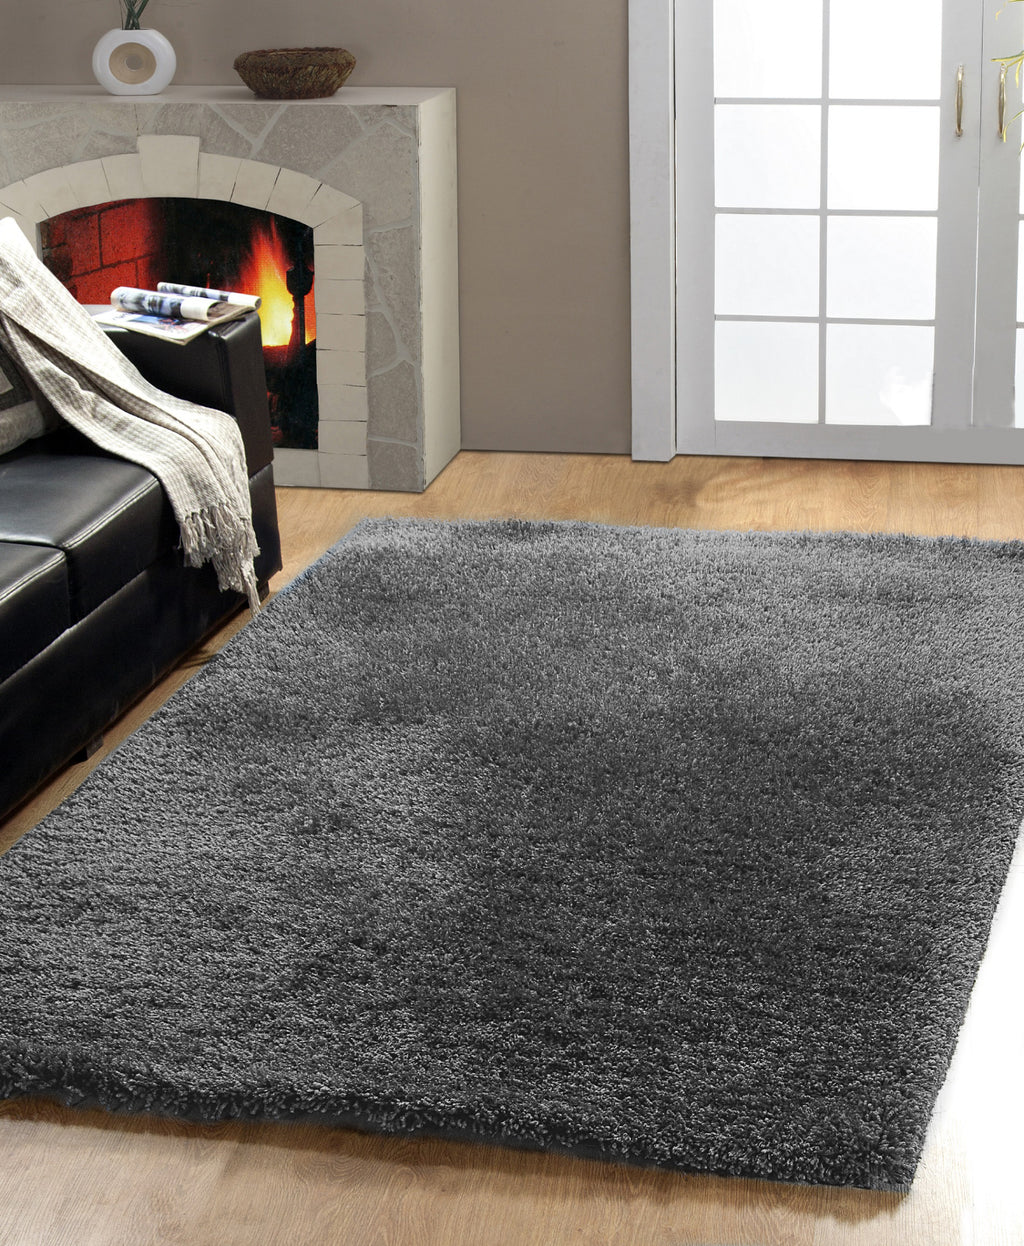 Dynamic Rugs Forte 88601 Black/White Area Rug Lifestyle Image Feature